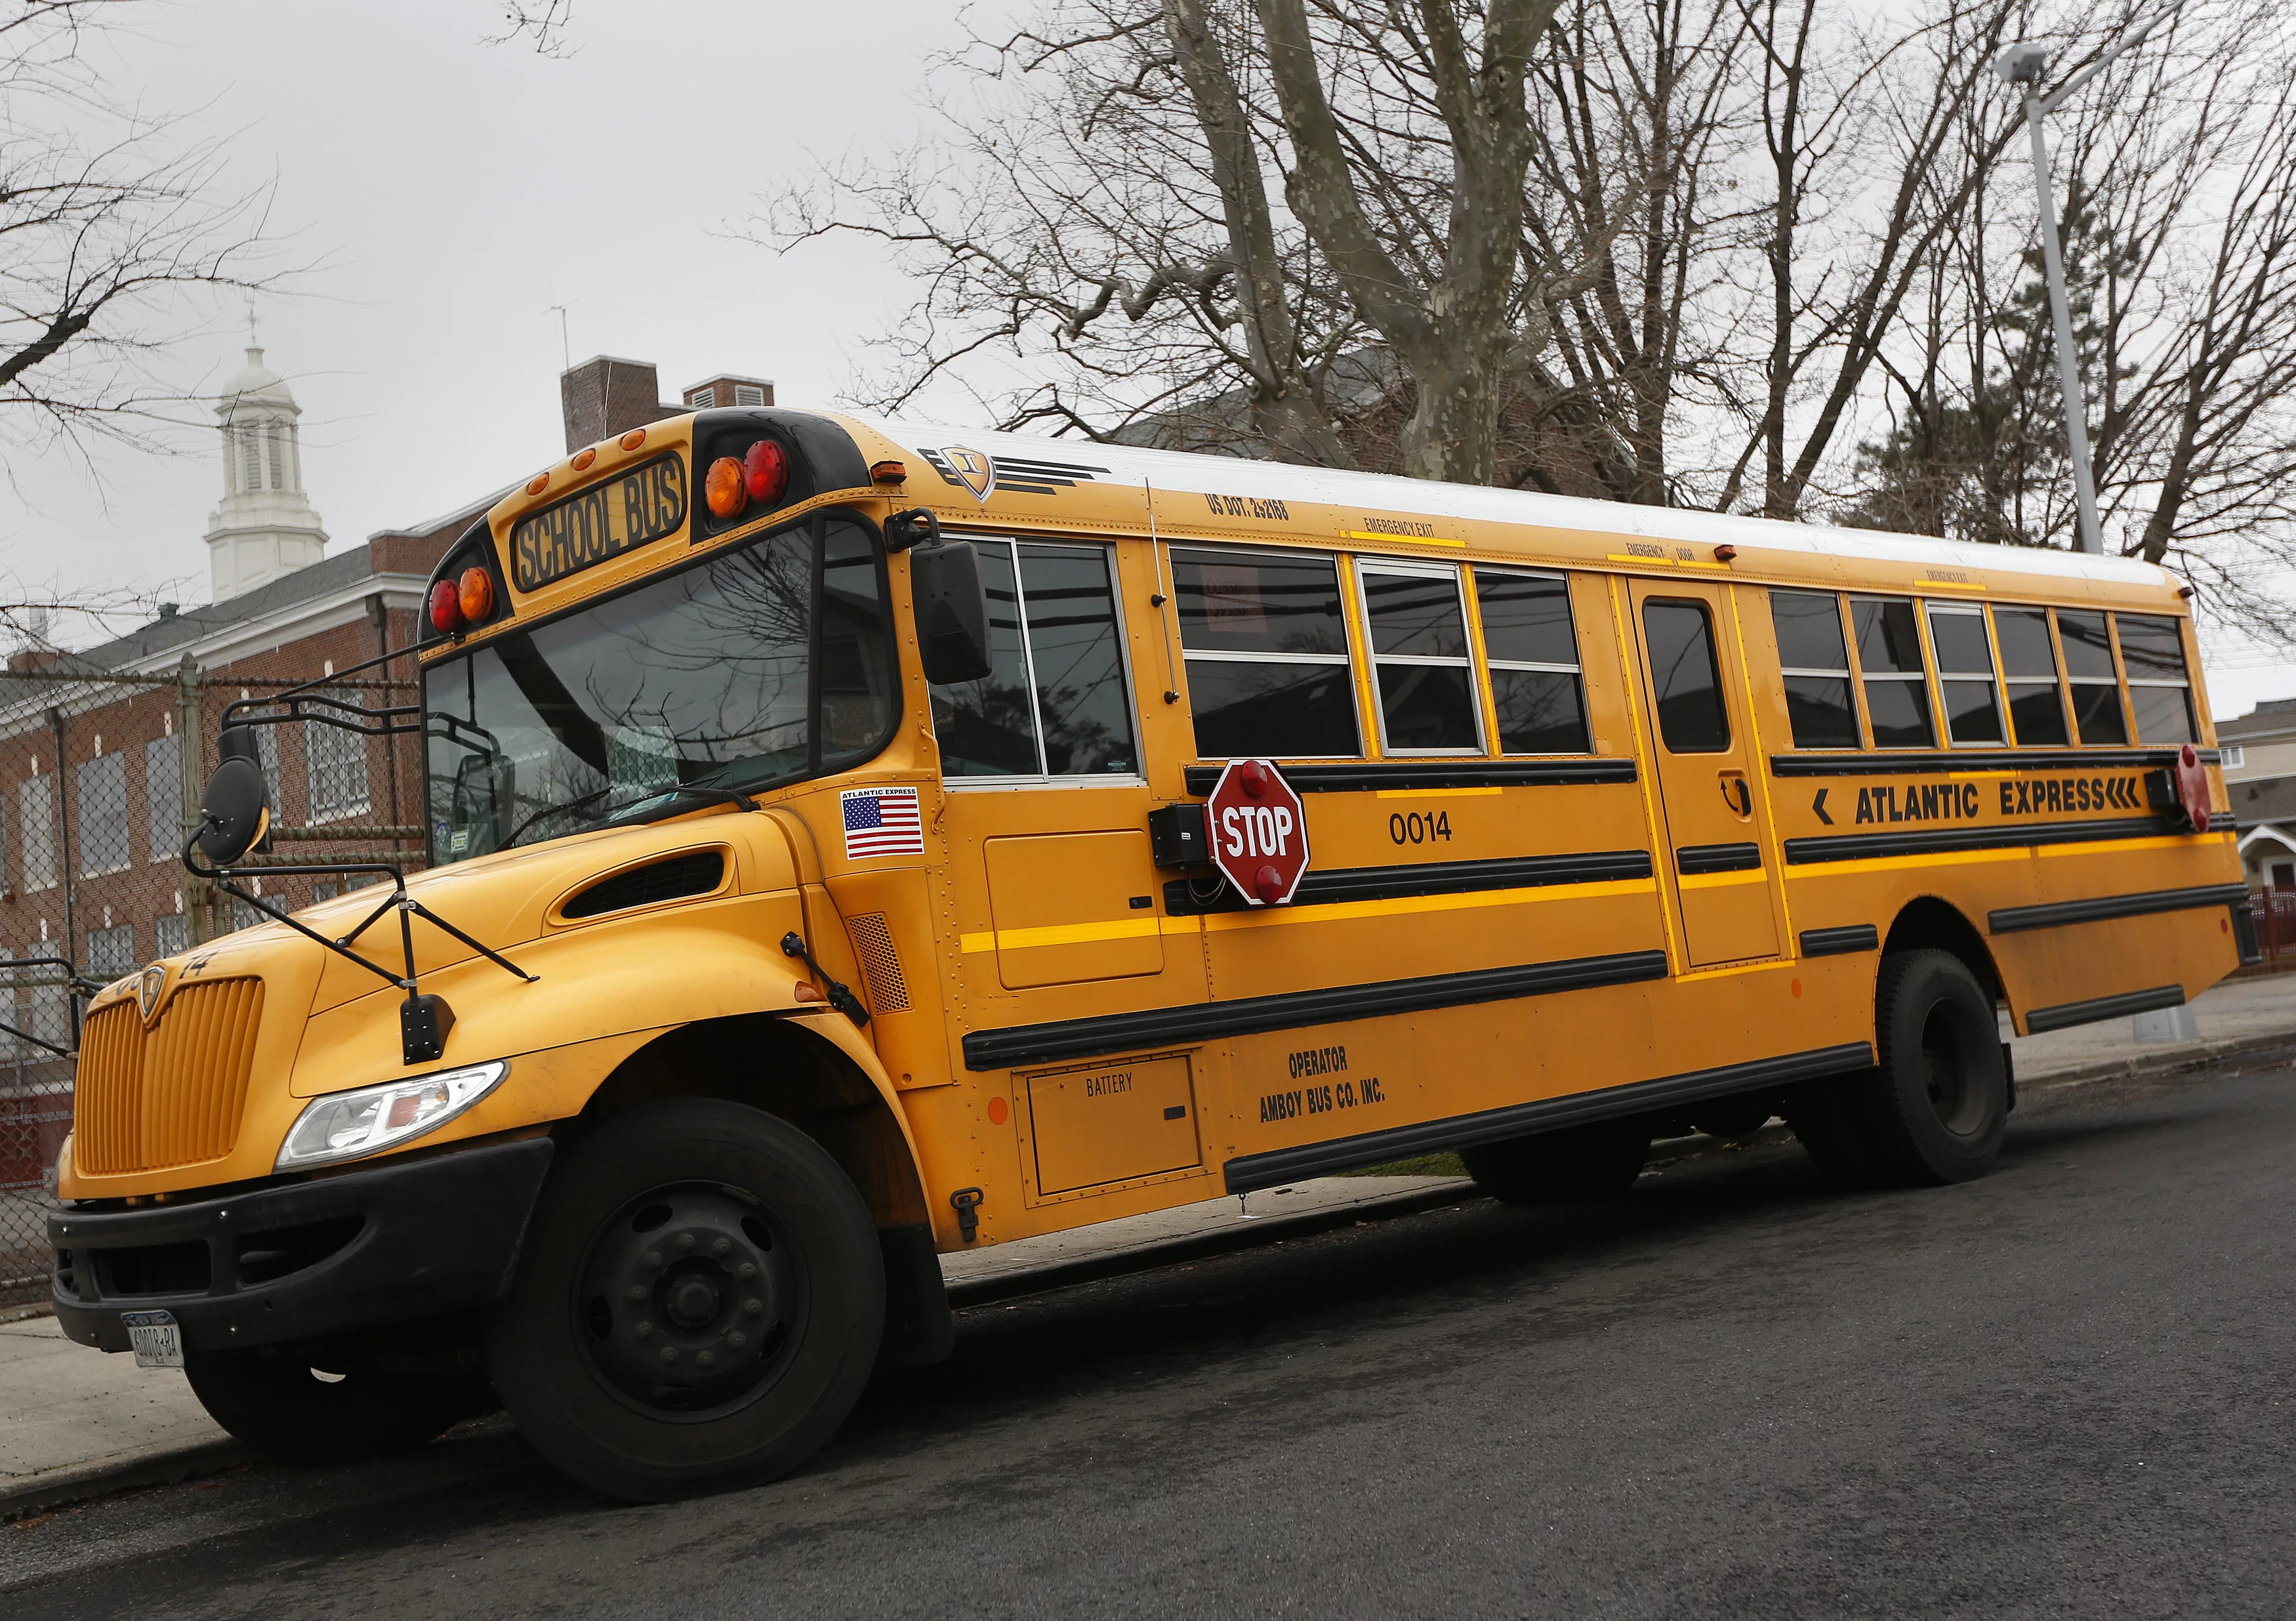 a-school-bus-used-for-transporting-new-york-city-public-school-students-is-seen-parked-in-front-of-a-school-in-the-queens-borough-of-new-york